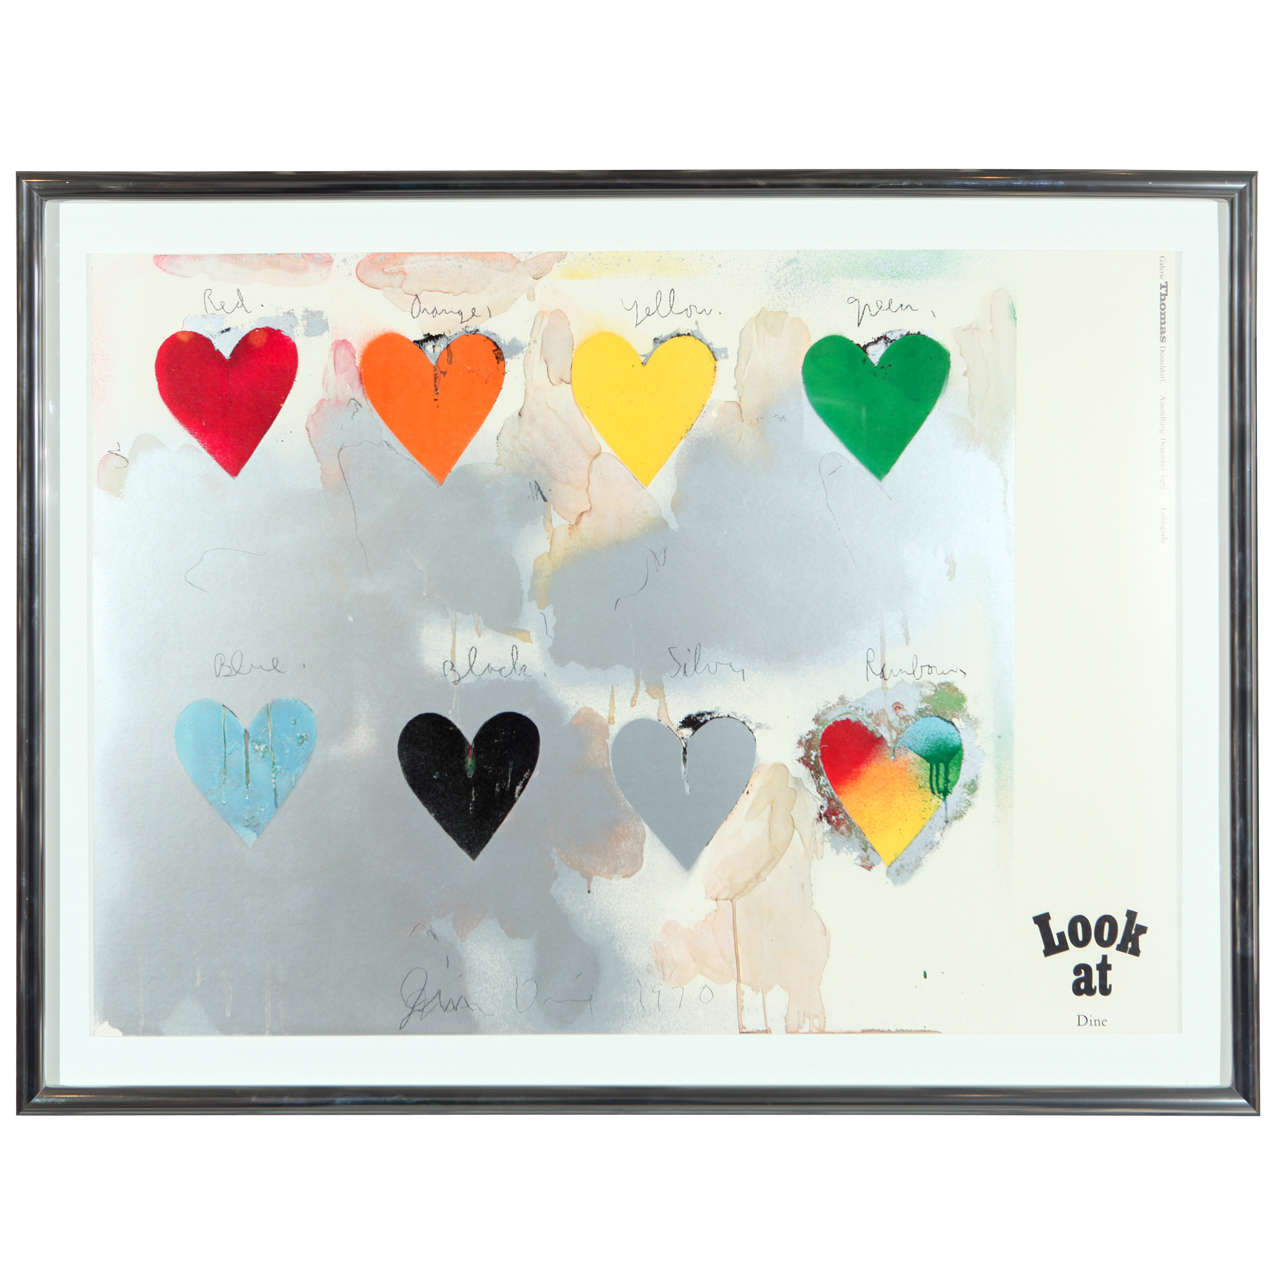 Jim Dine | 8 Hearts, 1970 | Signed Lithograph